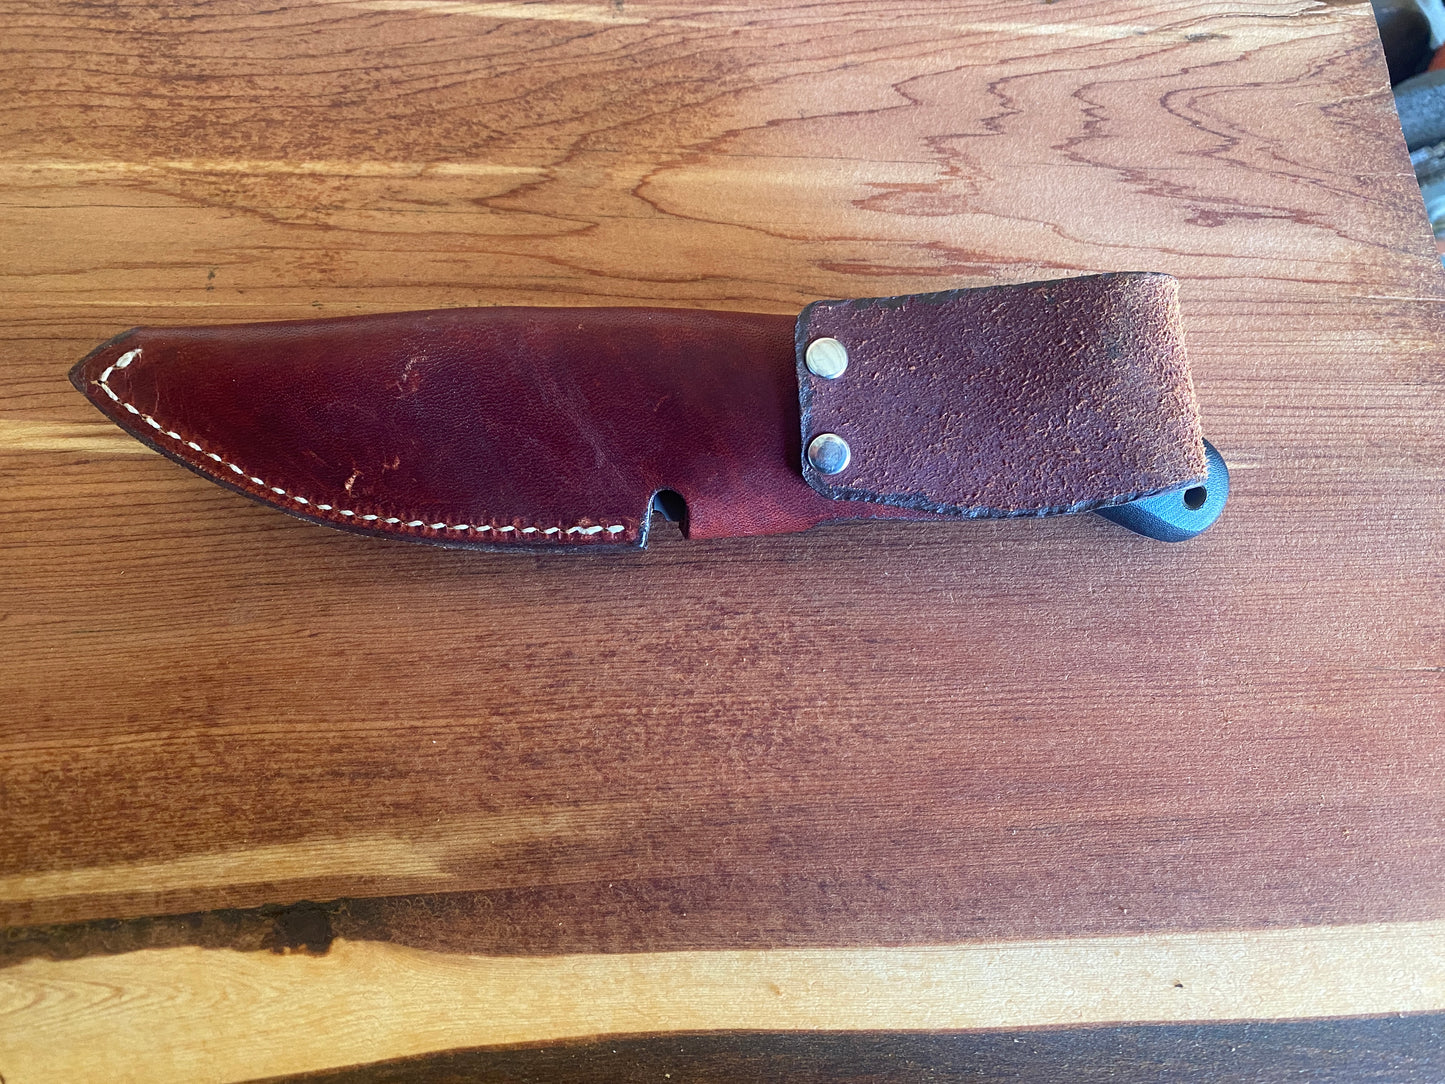 Browning Model 682 Colter Bay Sheath Knife